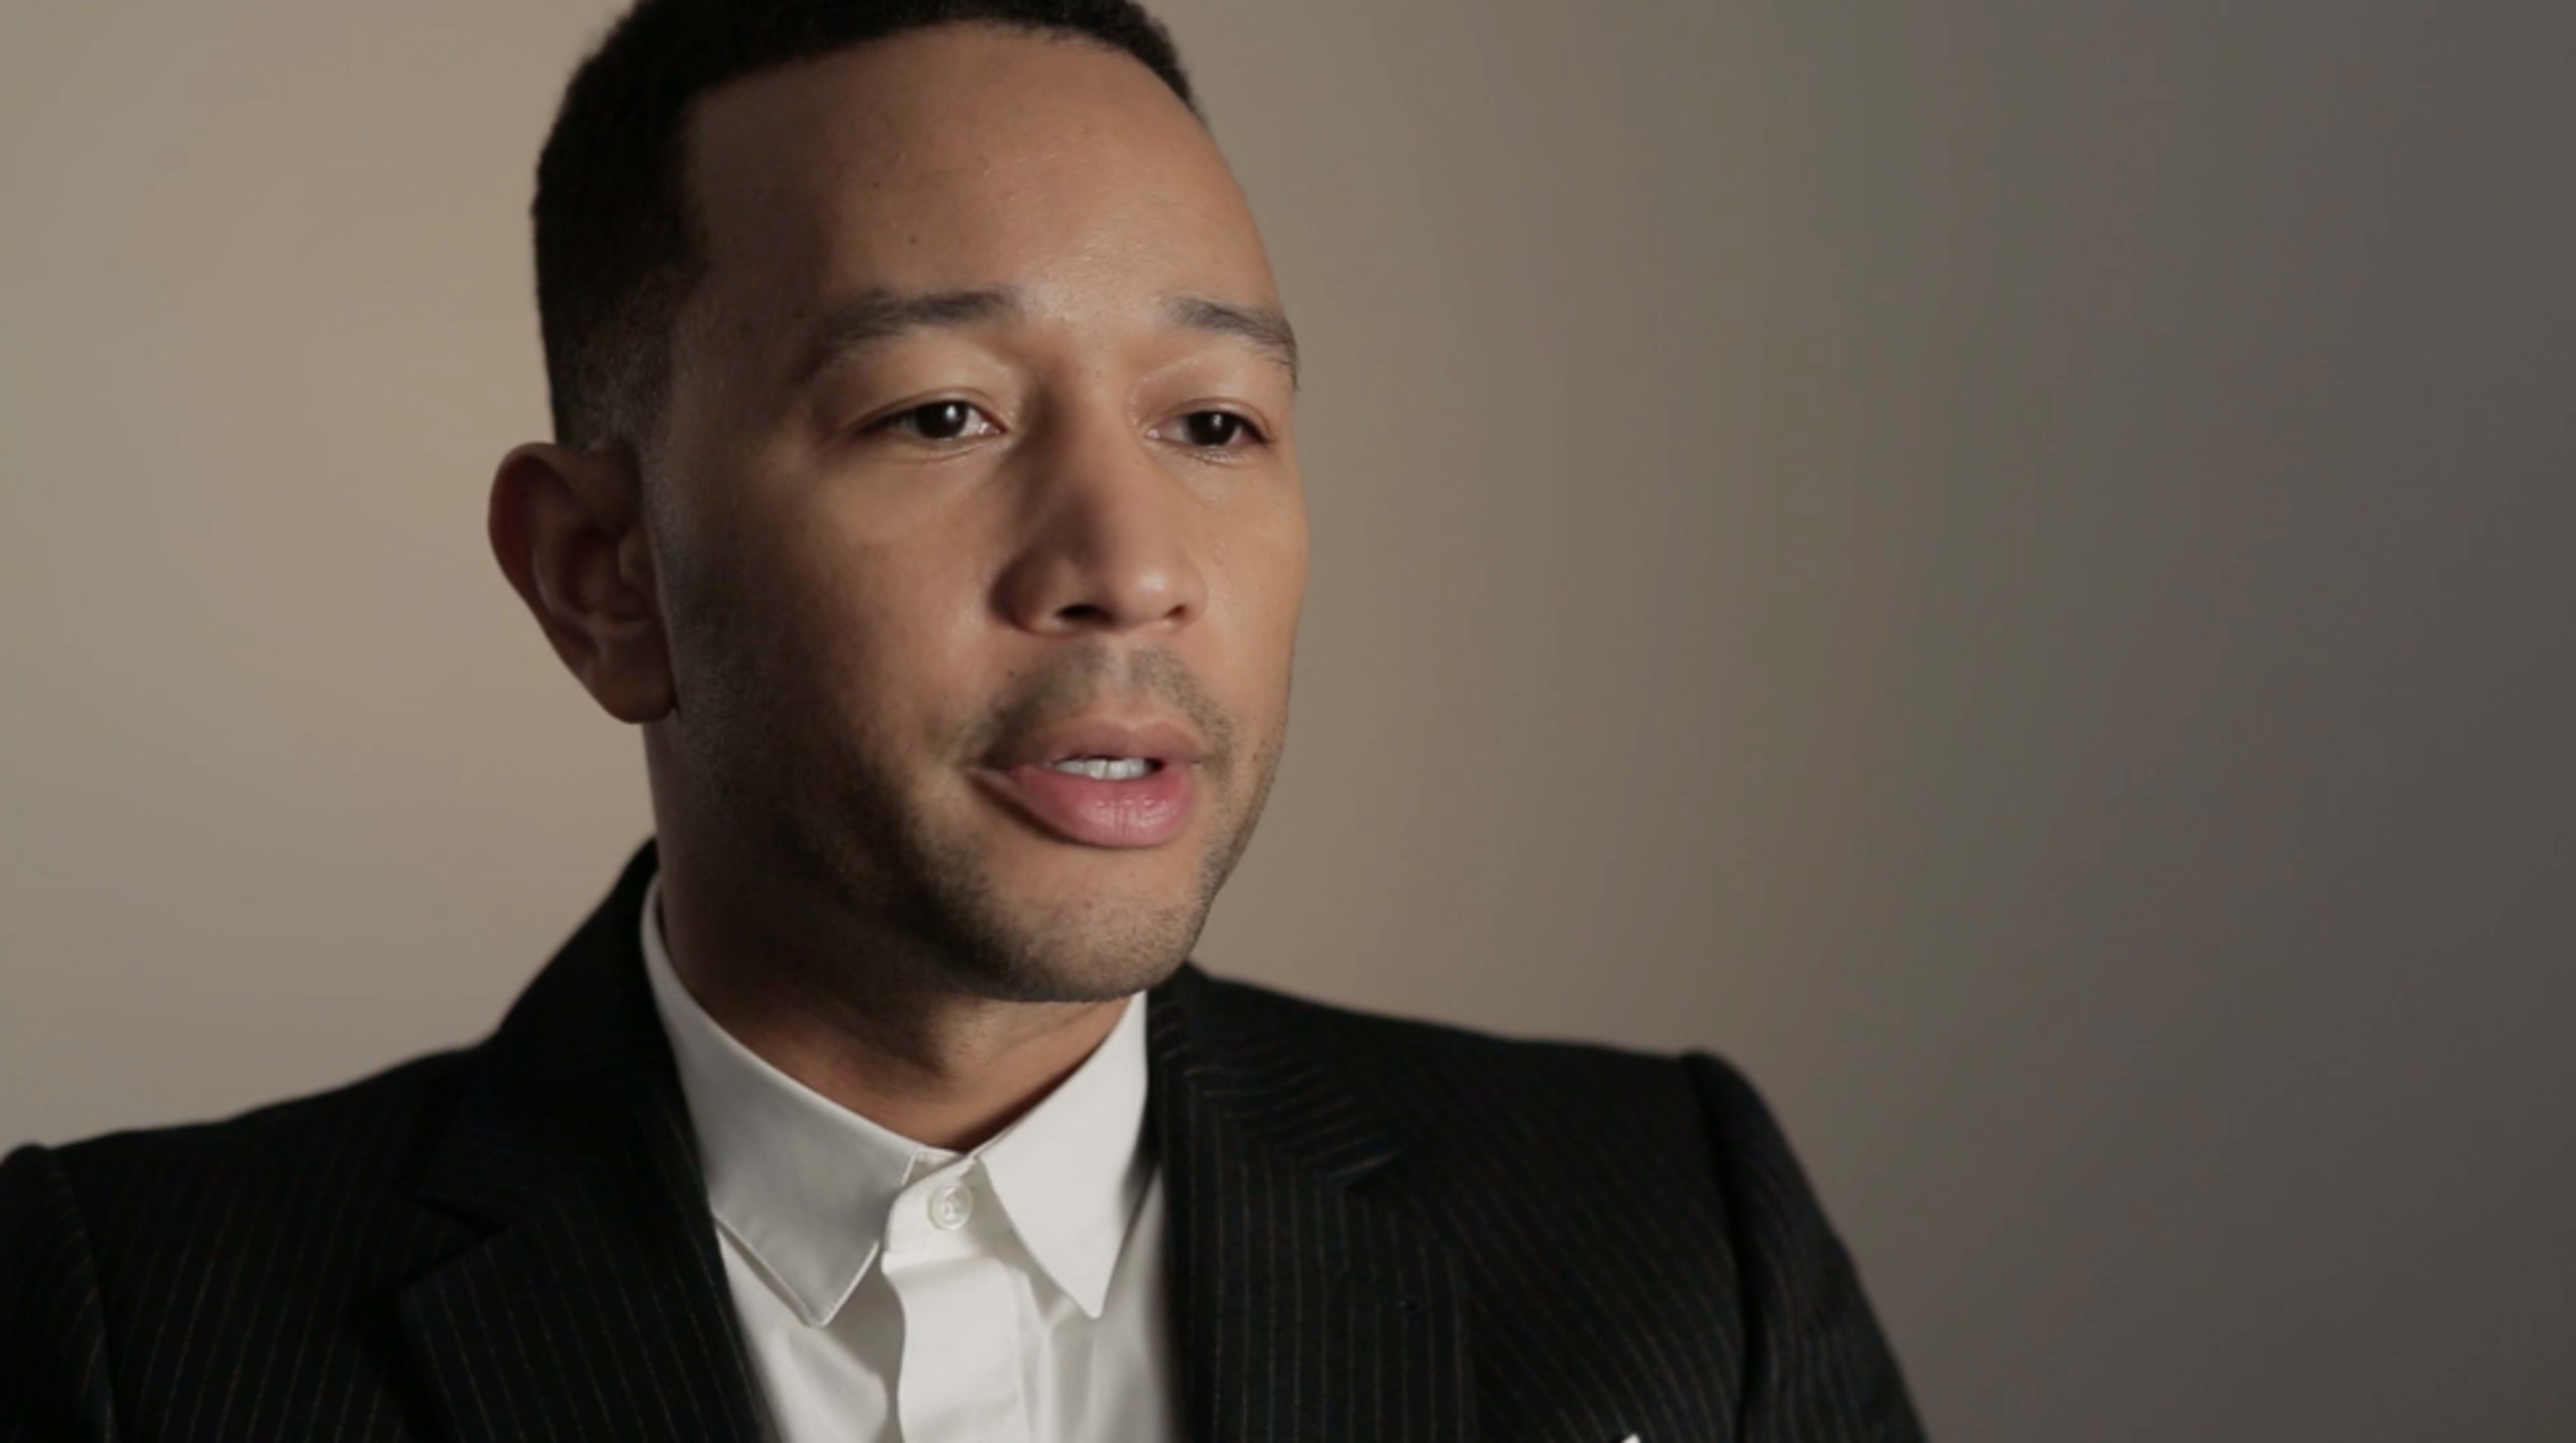 Here’s What John Legend Has To Say About Criminal Justice Reform